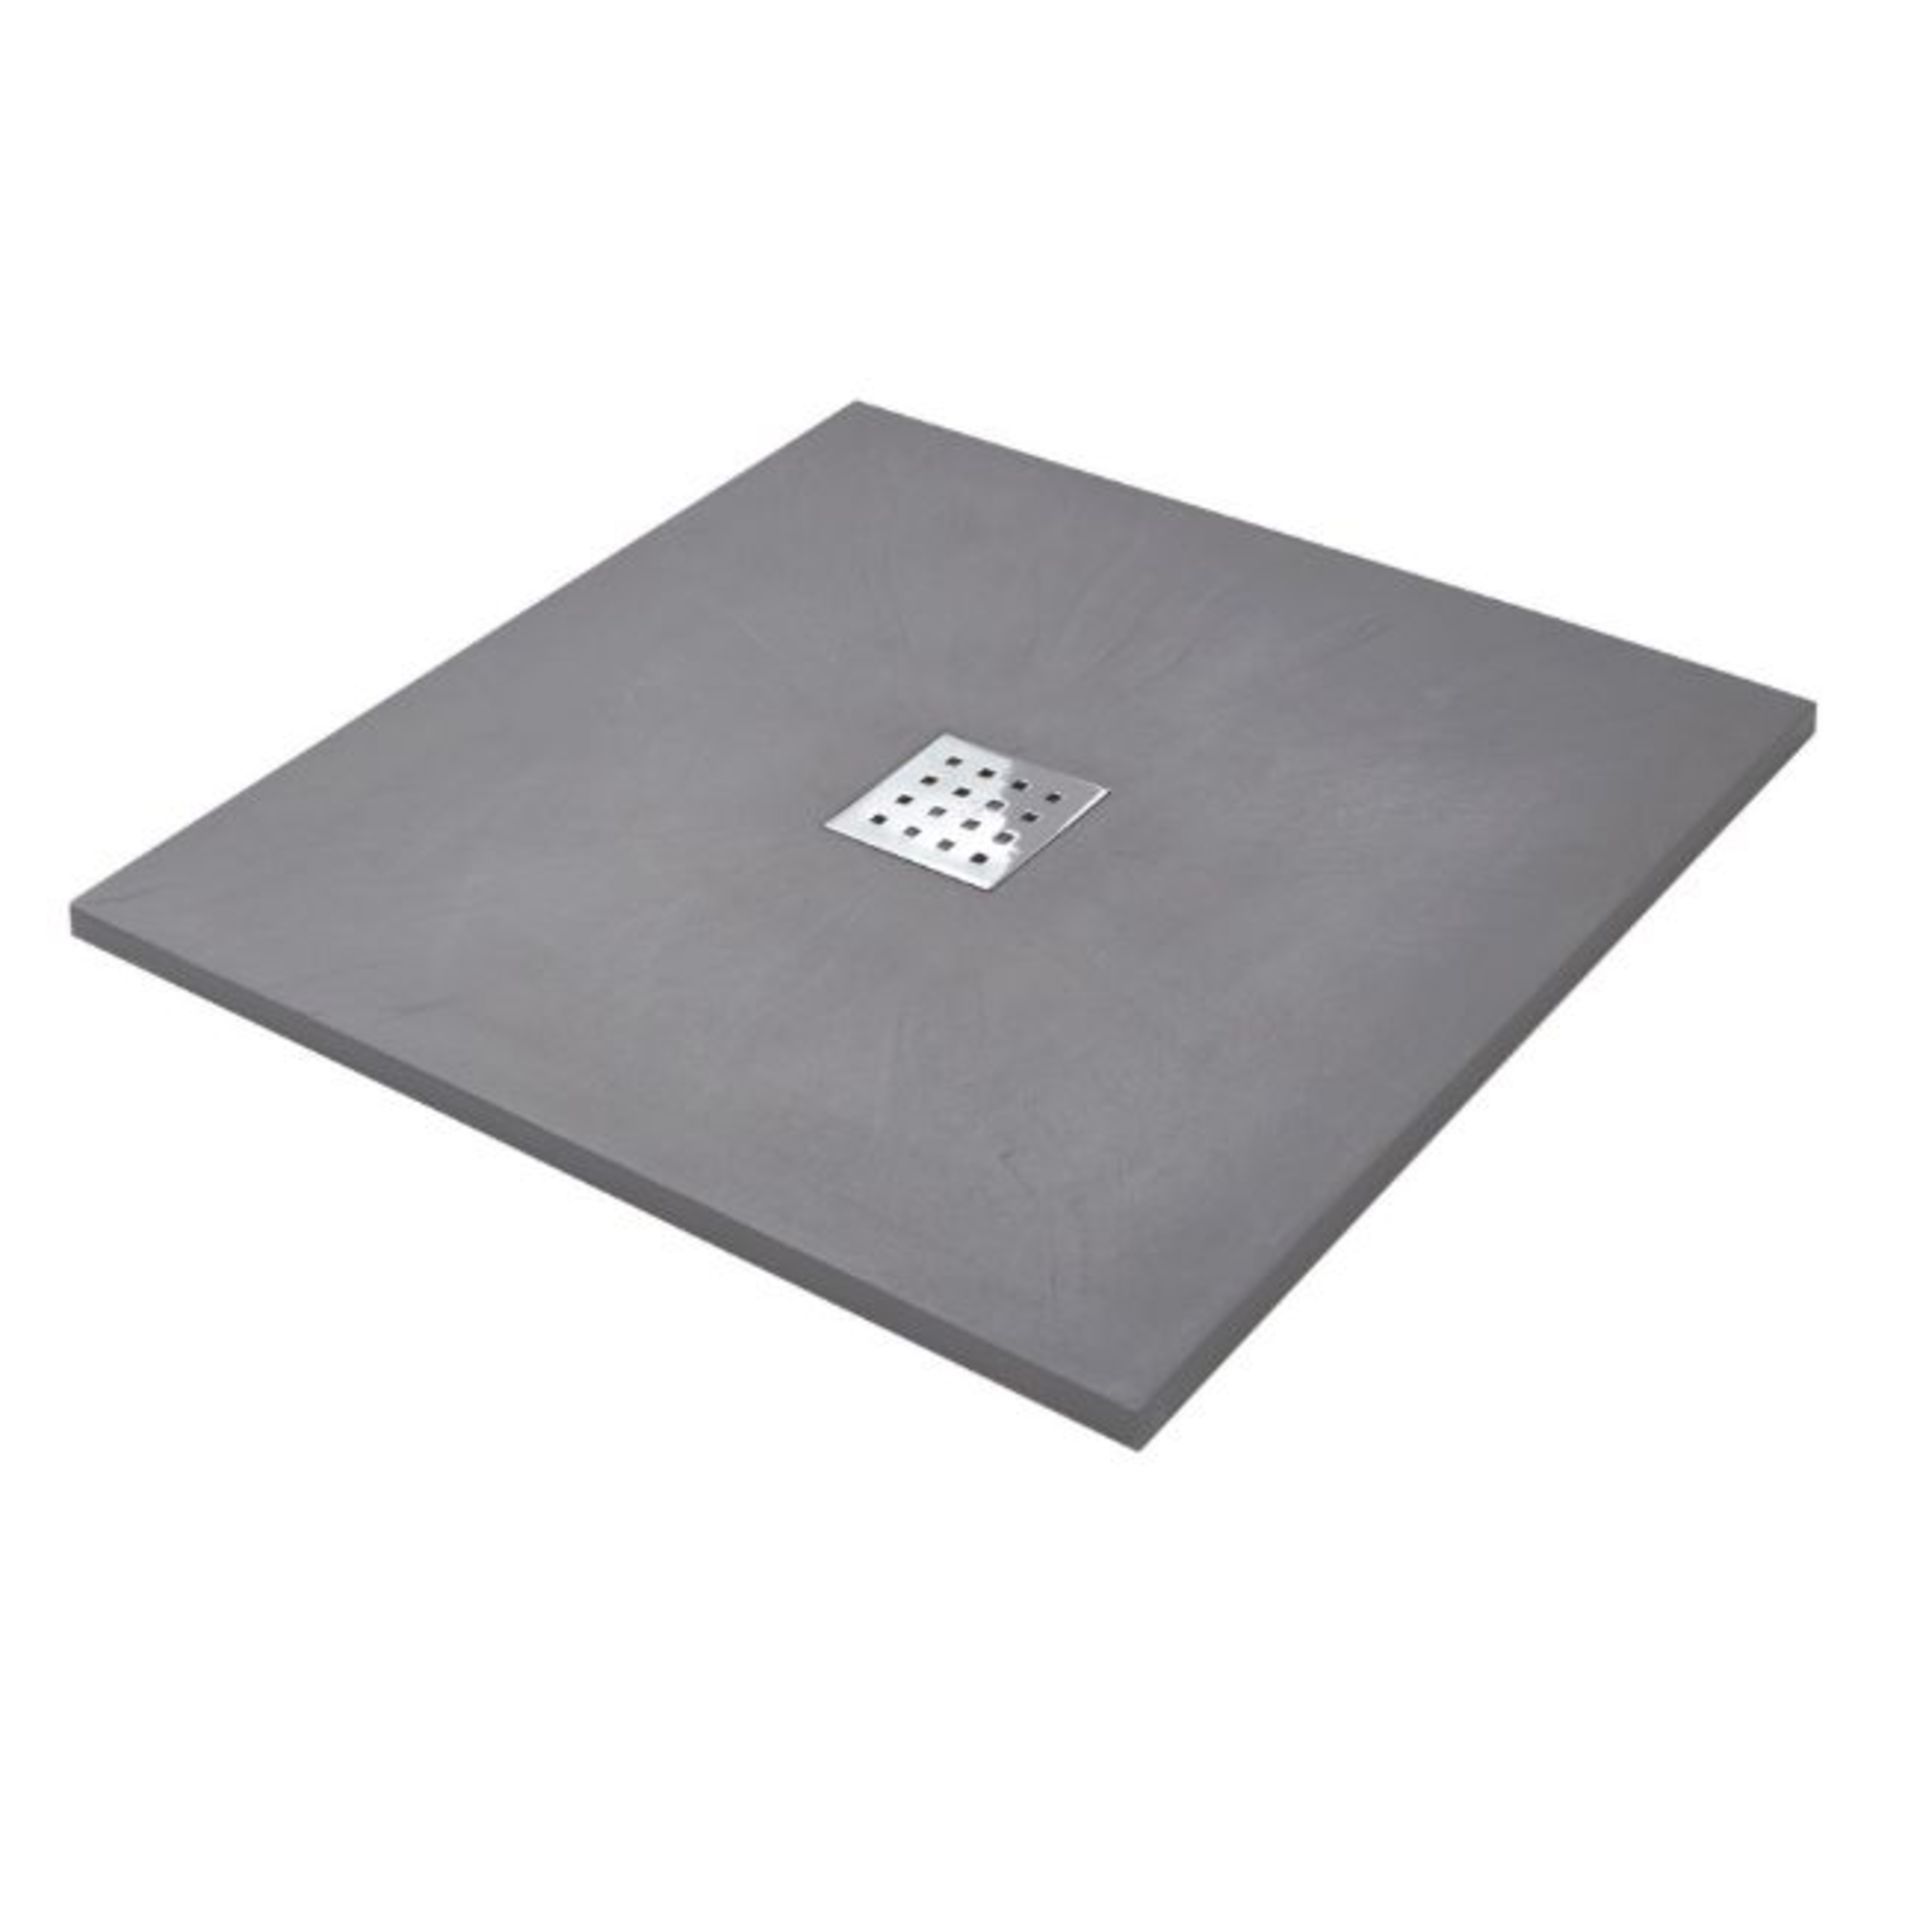 New 900x900 mm Square Slate Effect Shower Tray In Grey. Manufactured In The Uk From High Grade ... - Image 2 of 3